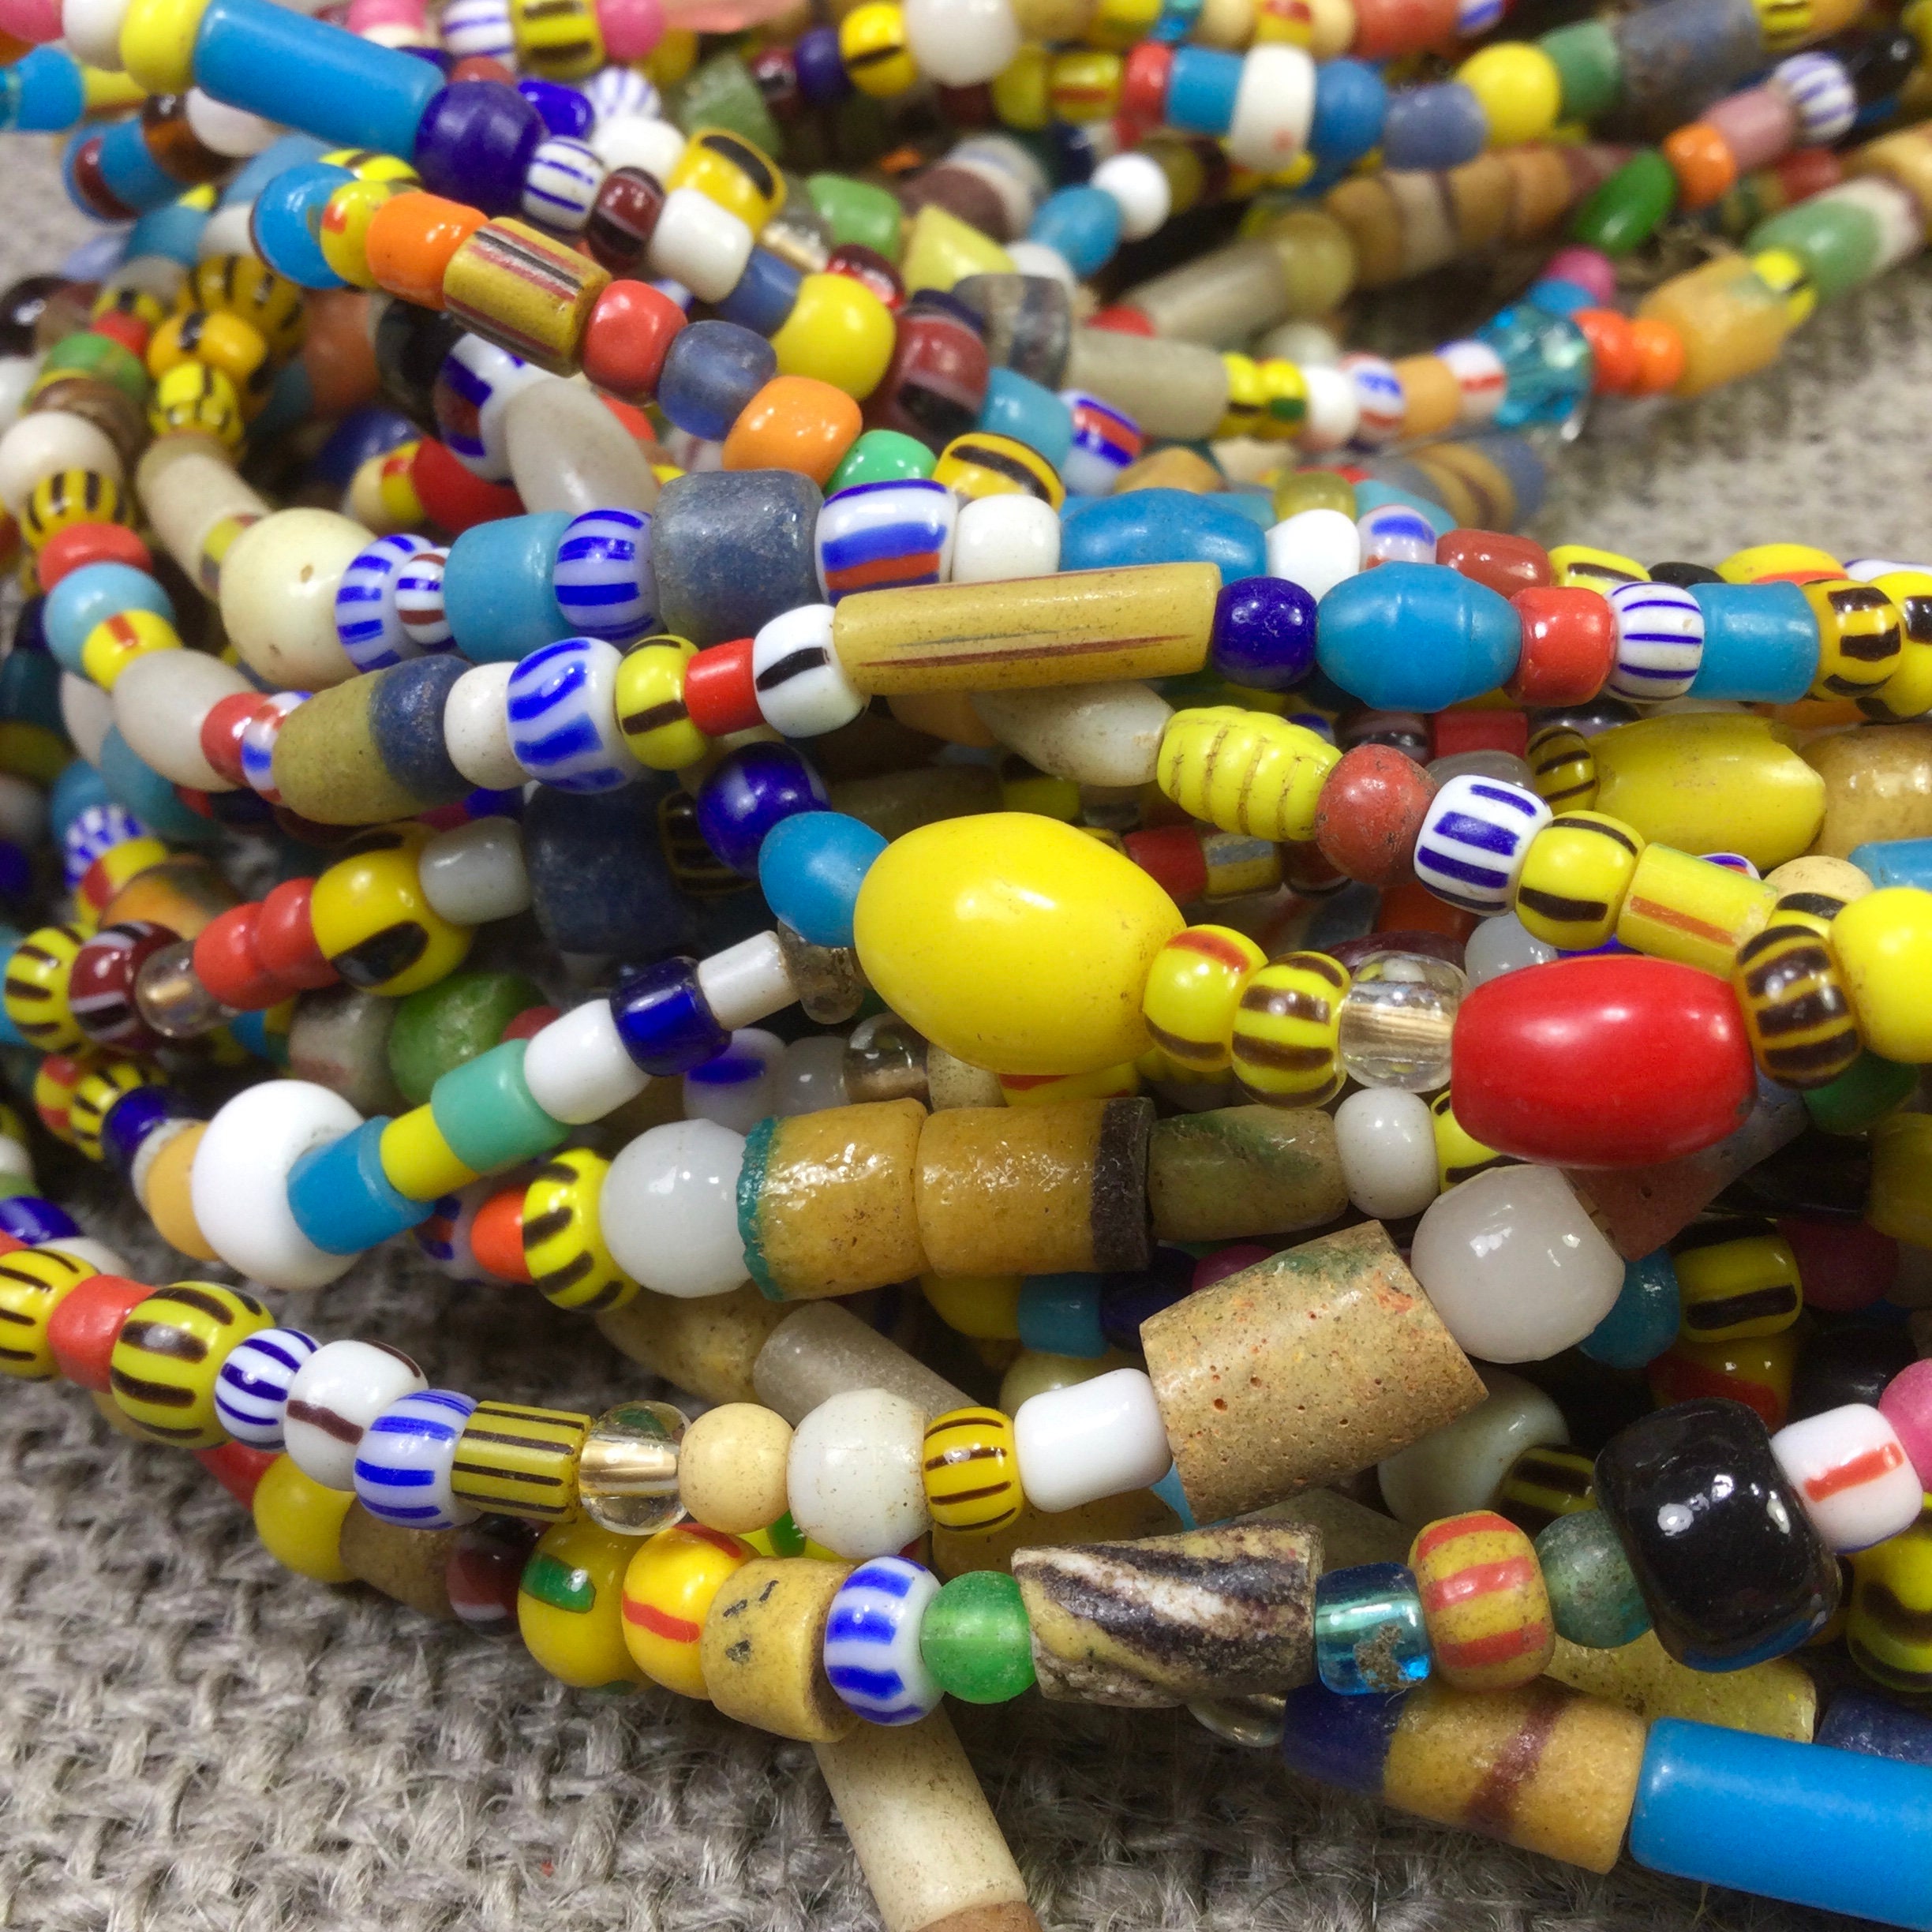 ON SALE African Mixed Beads: 2 Pounds